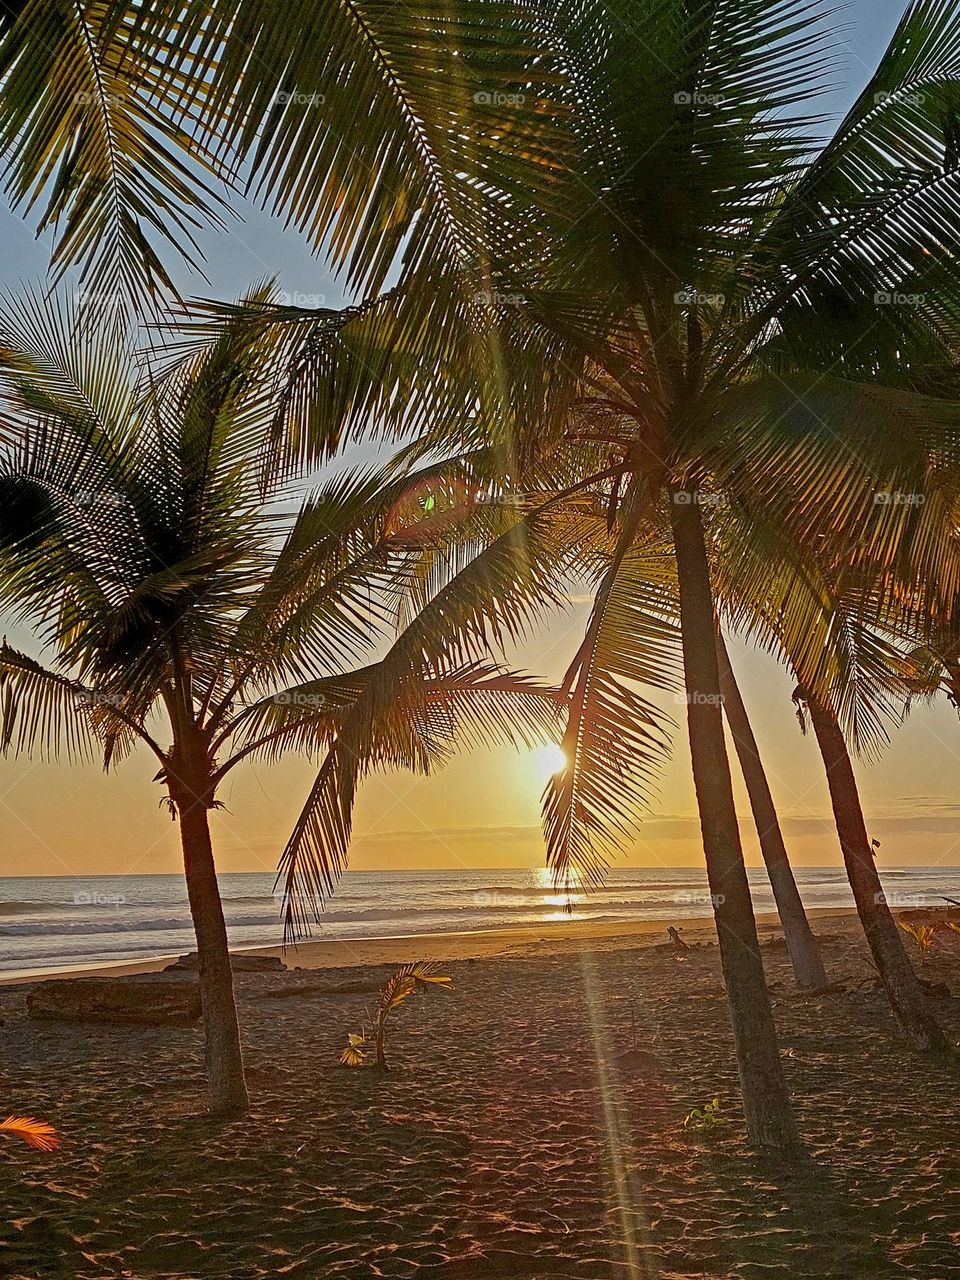 Magical sunset on the Pacific ocean.  The rays of the sun break through the palm branches